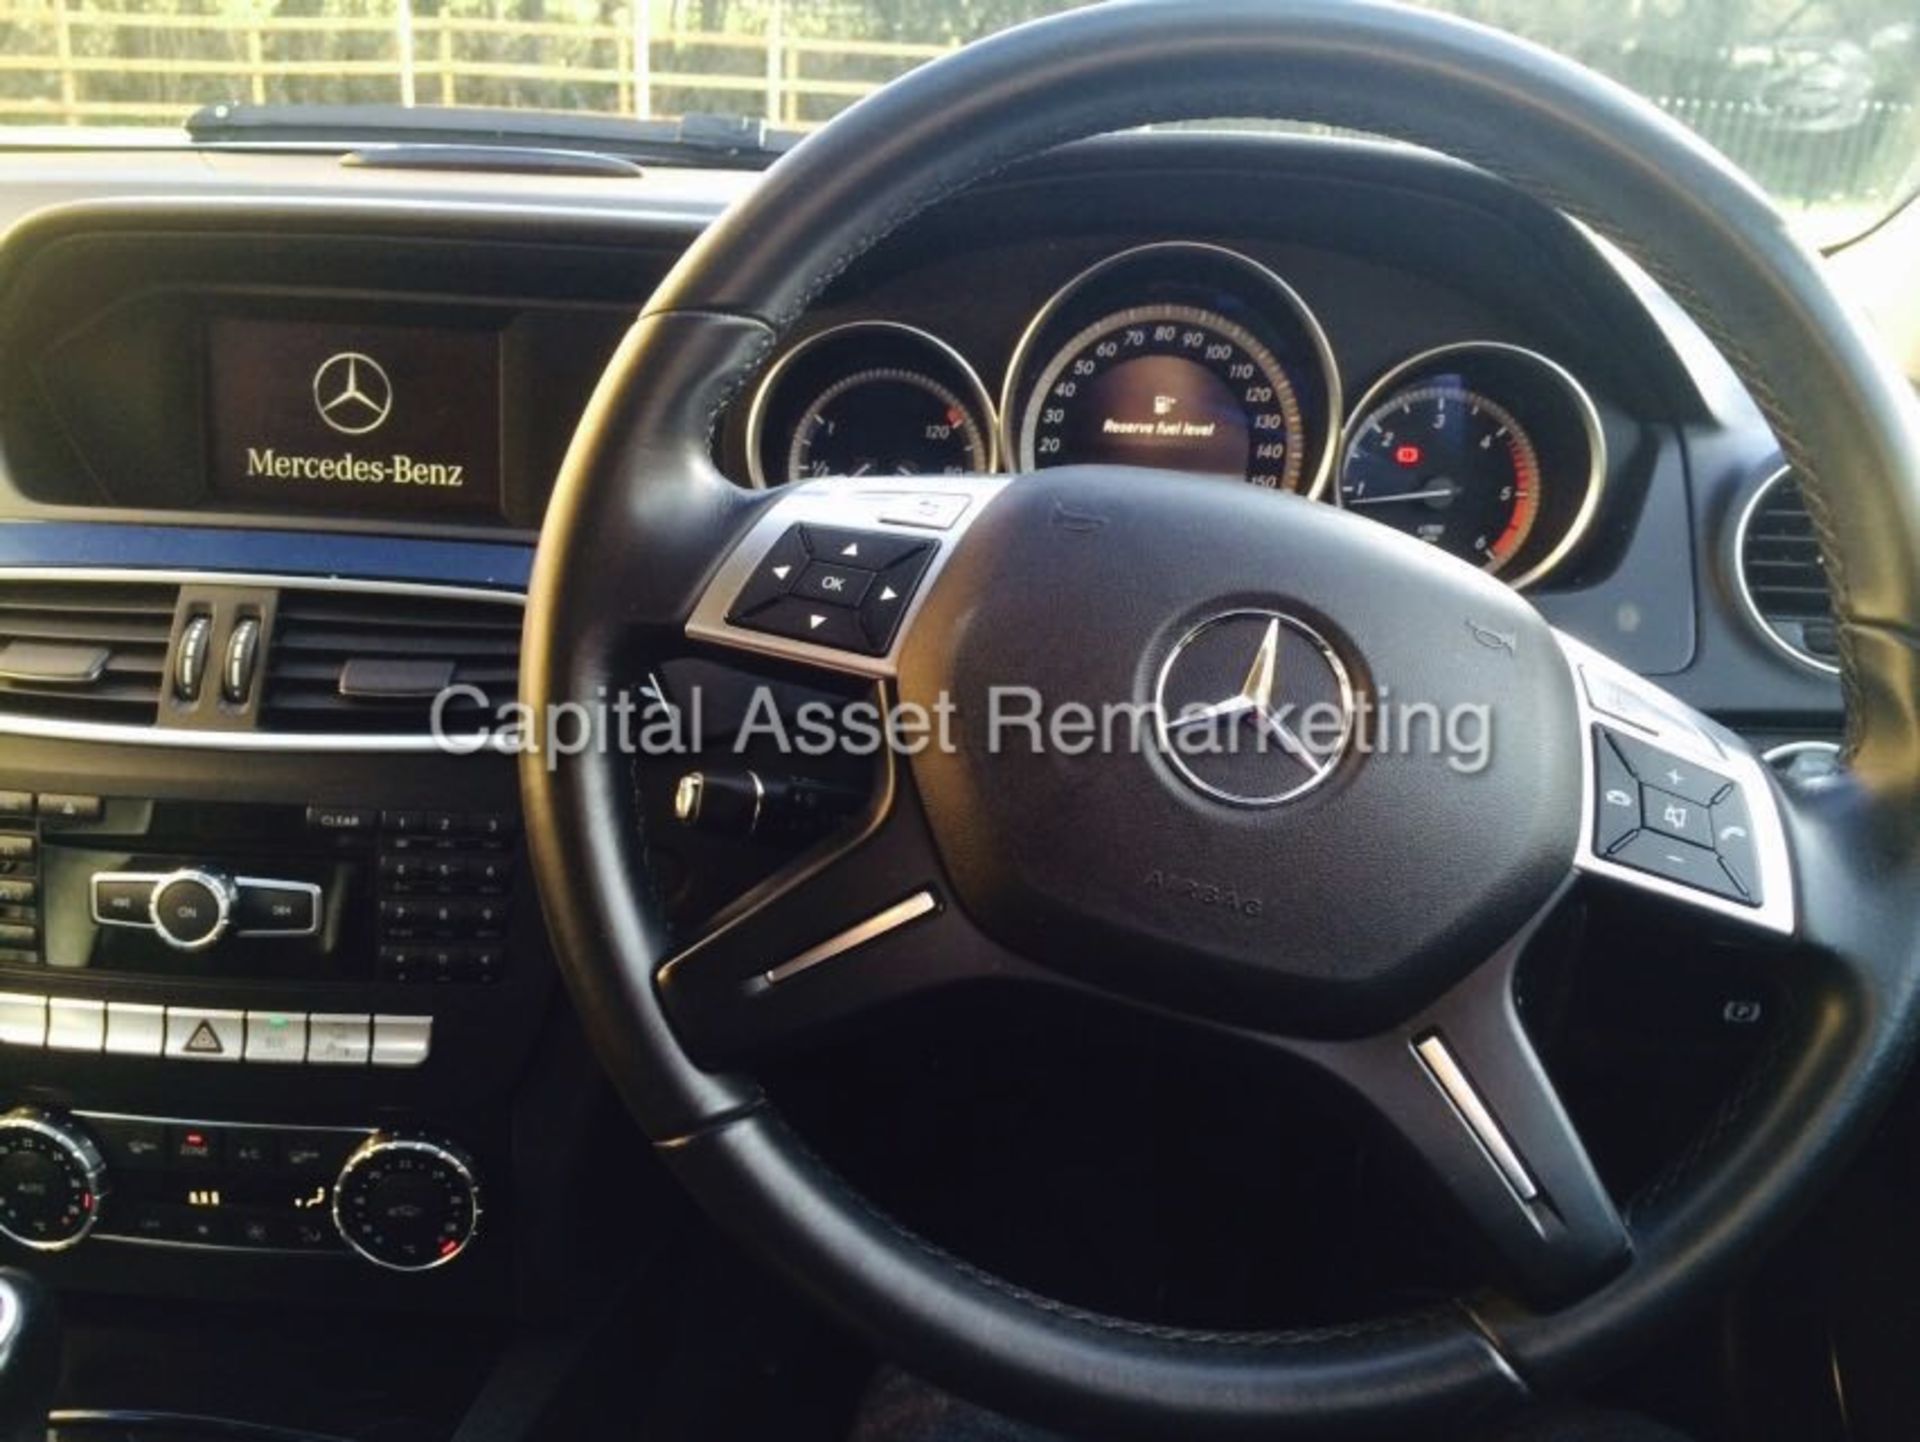 ON SALE MERCEDES C220CDI "EXECUTIVE SE" BLUE EFFINCY ECO (2012 -12 REG) 1 OWNER FROM NEW - LEATHER - Image 8 of 16